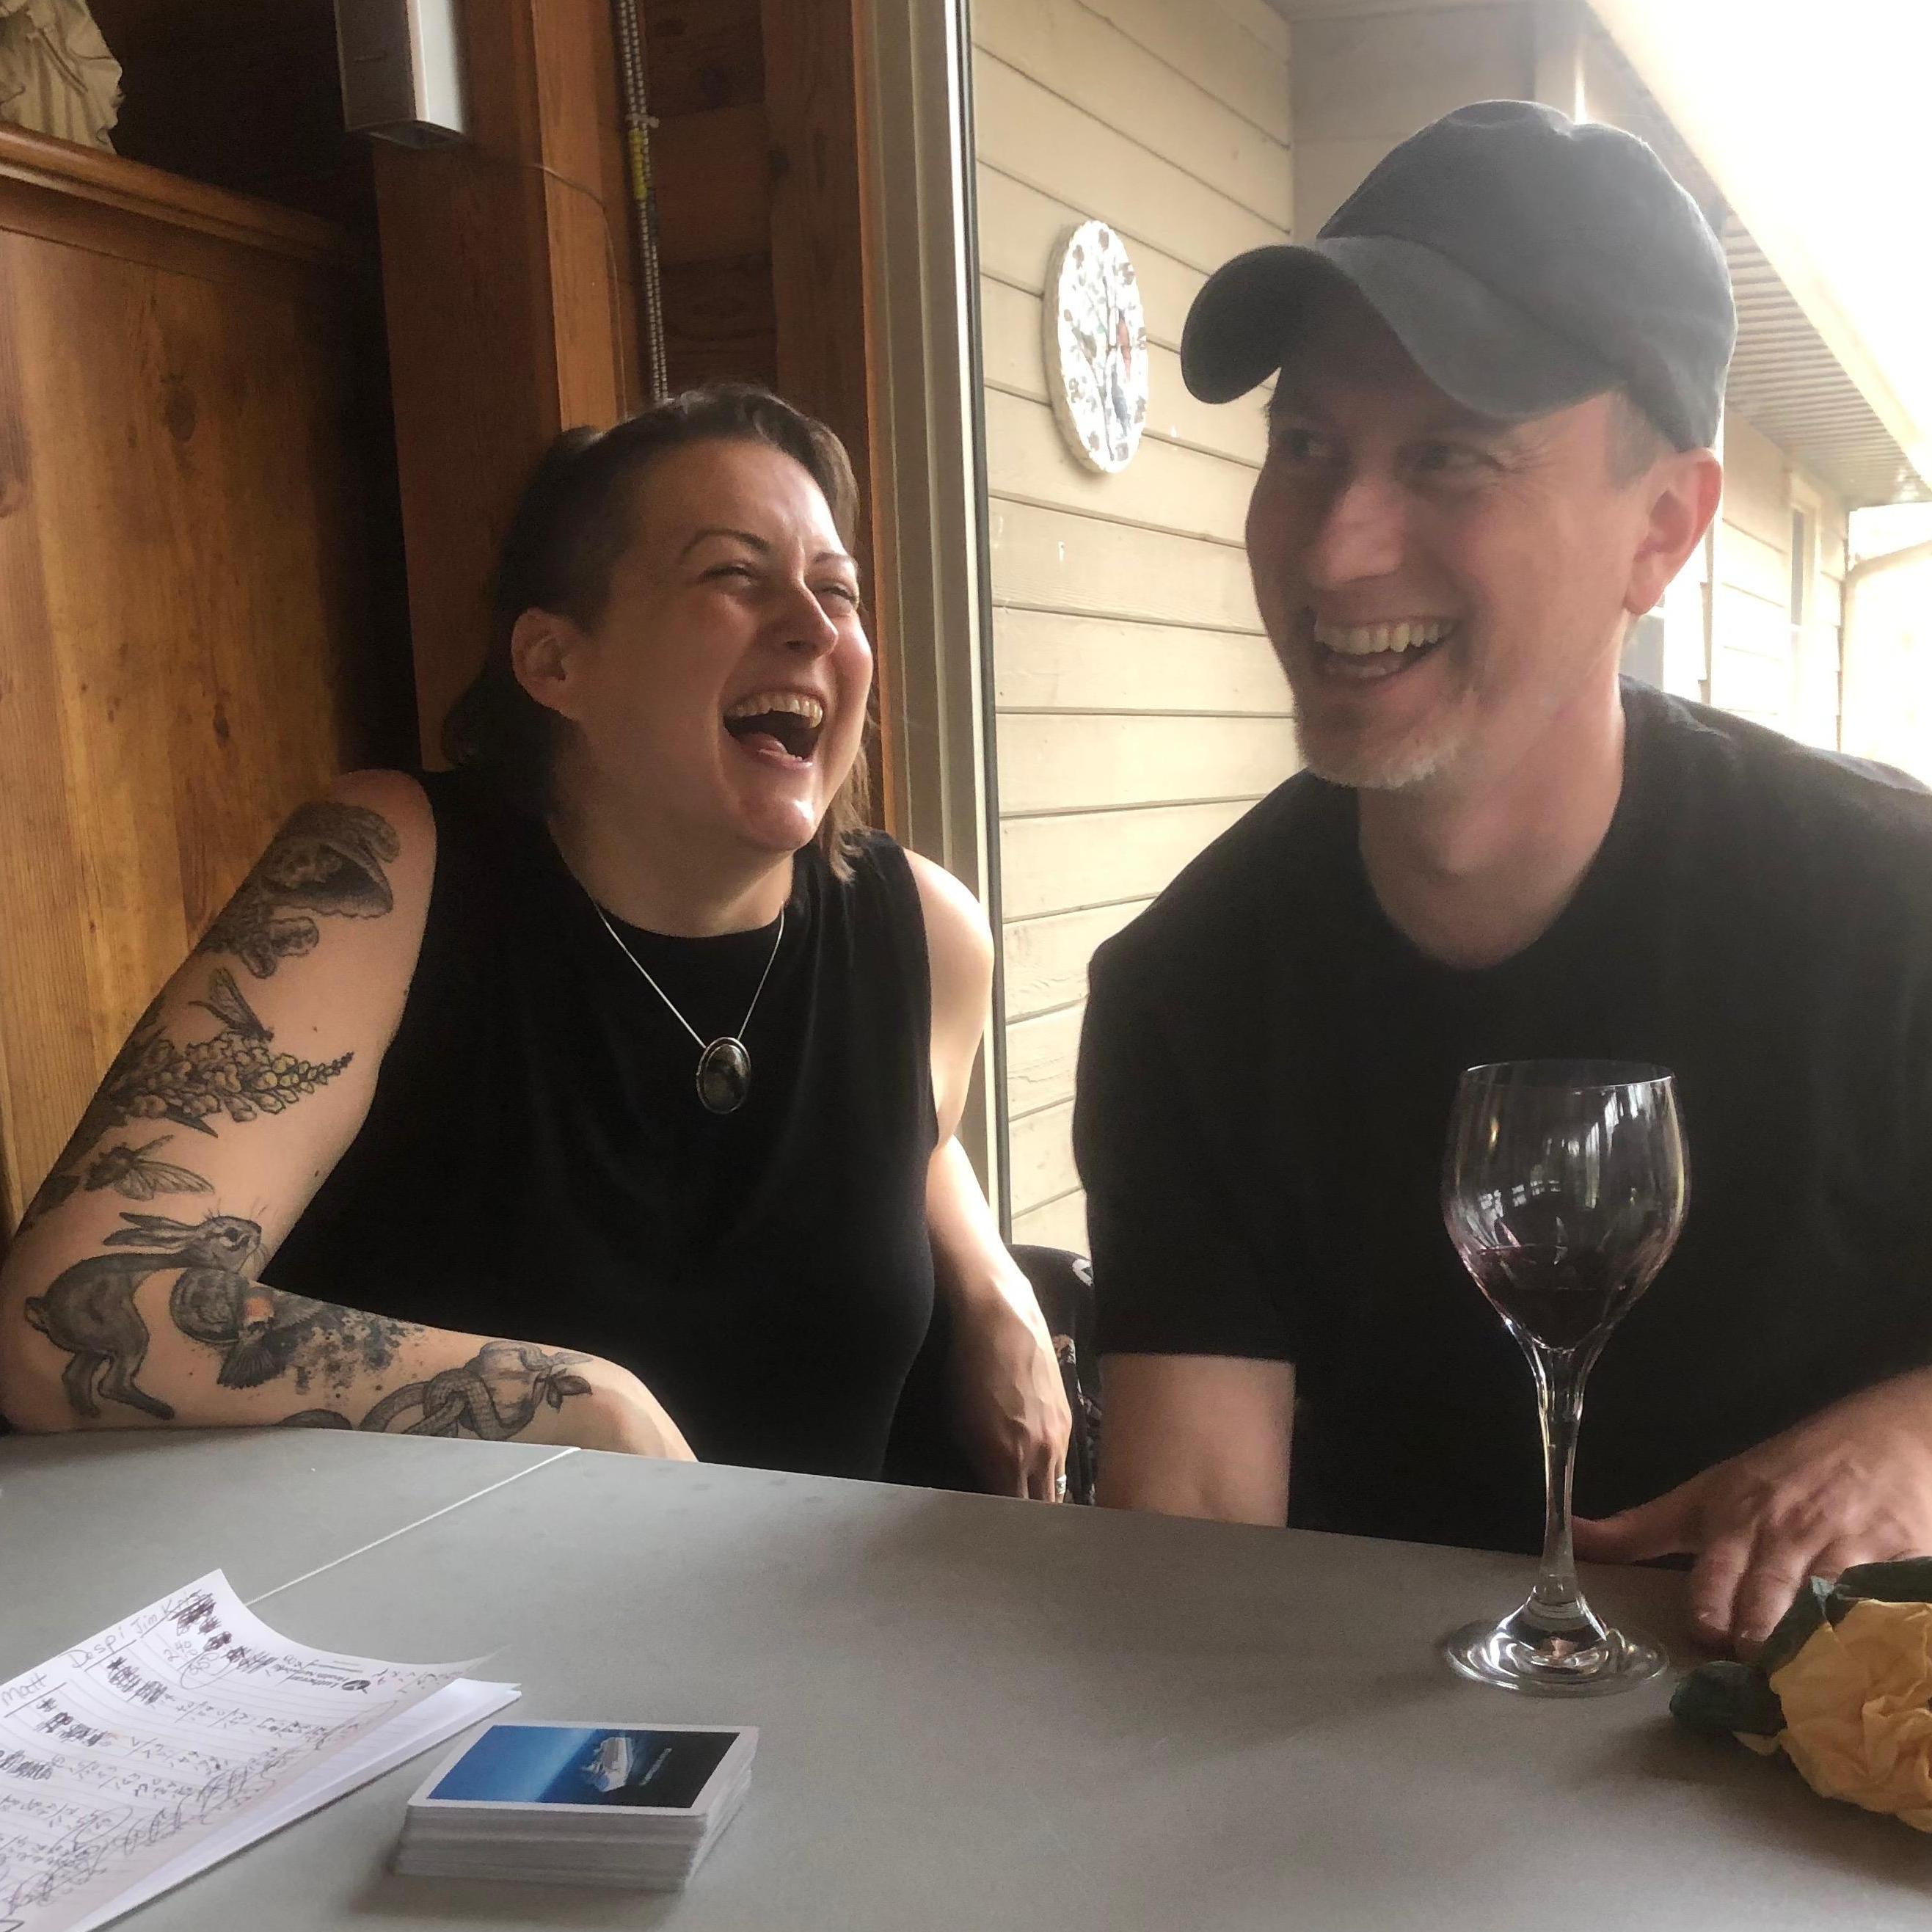 Laughing together is always the best. Thanks, Tina, for the photo!